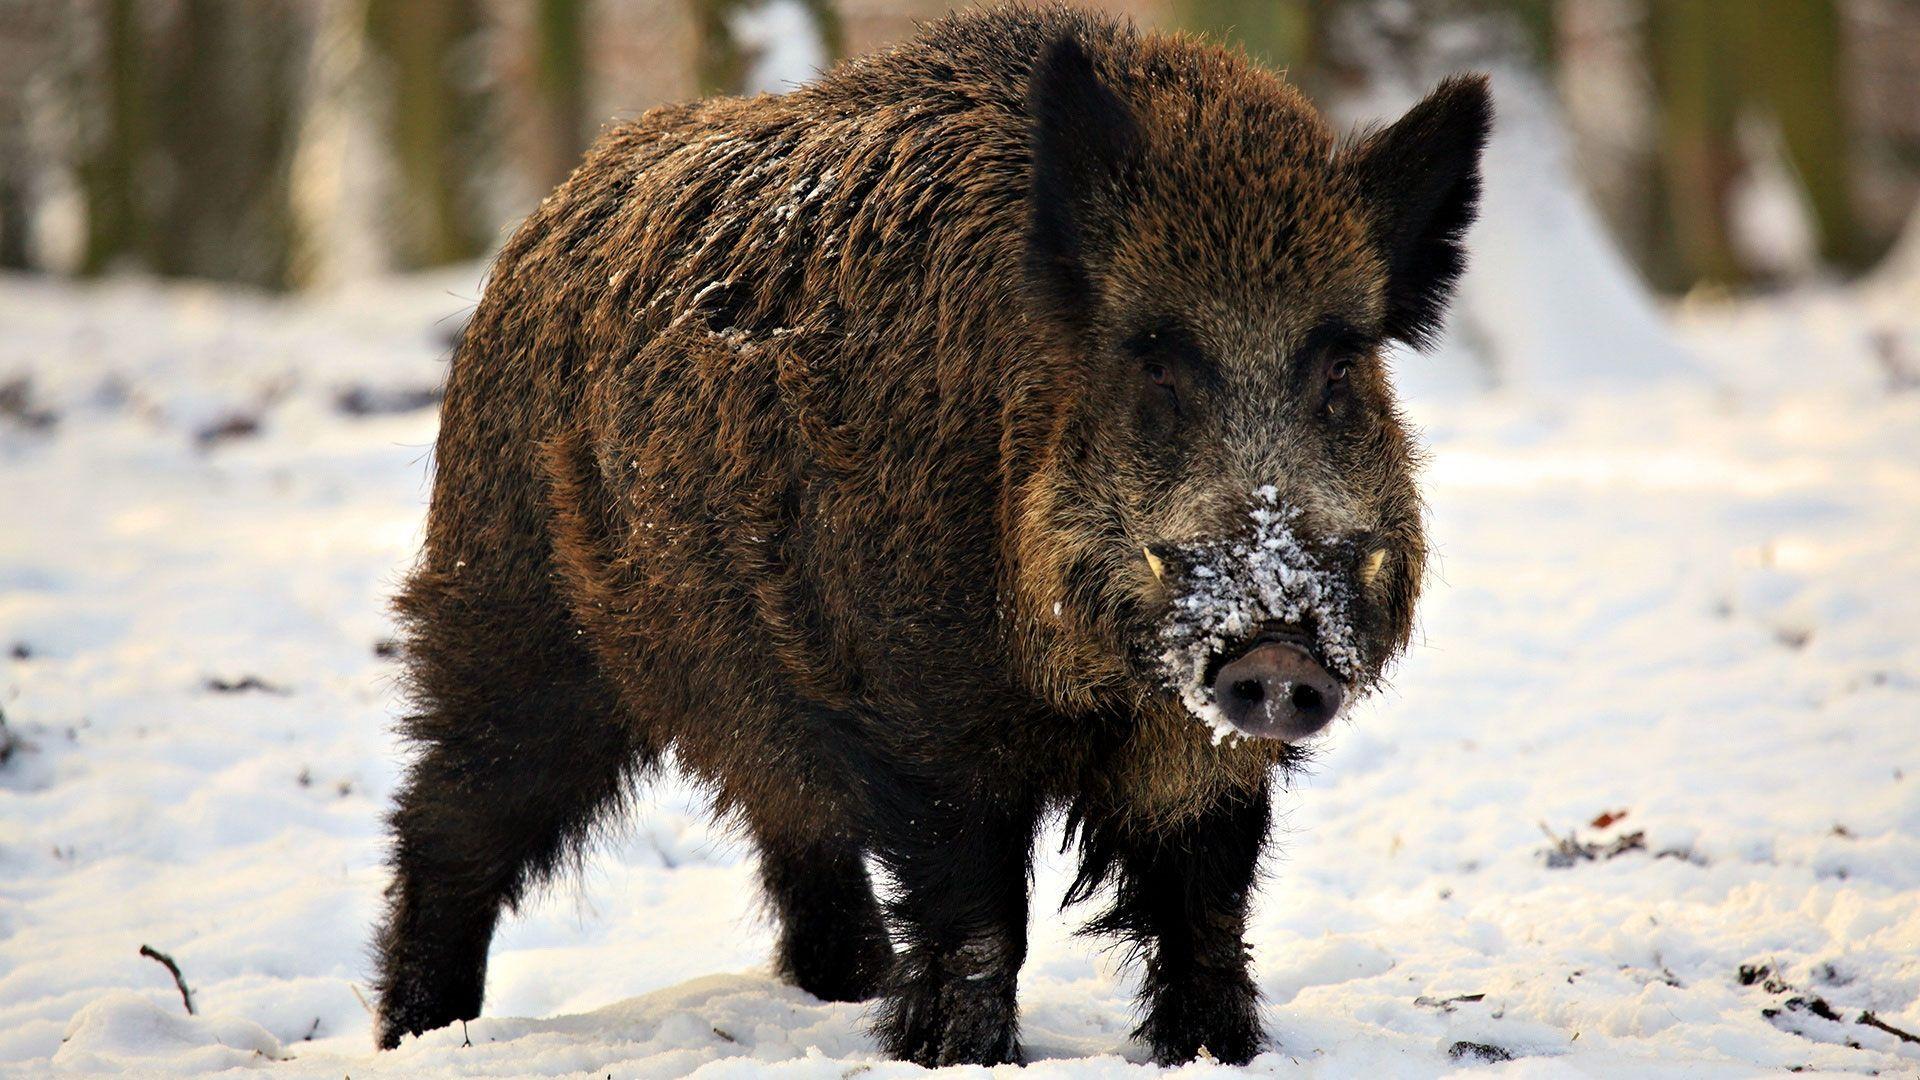 wild boar in snow. Illustrations for Snow White- references